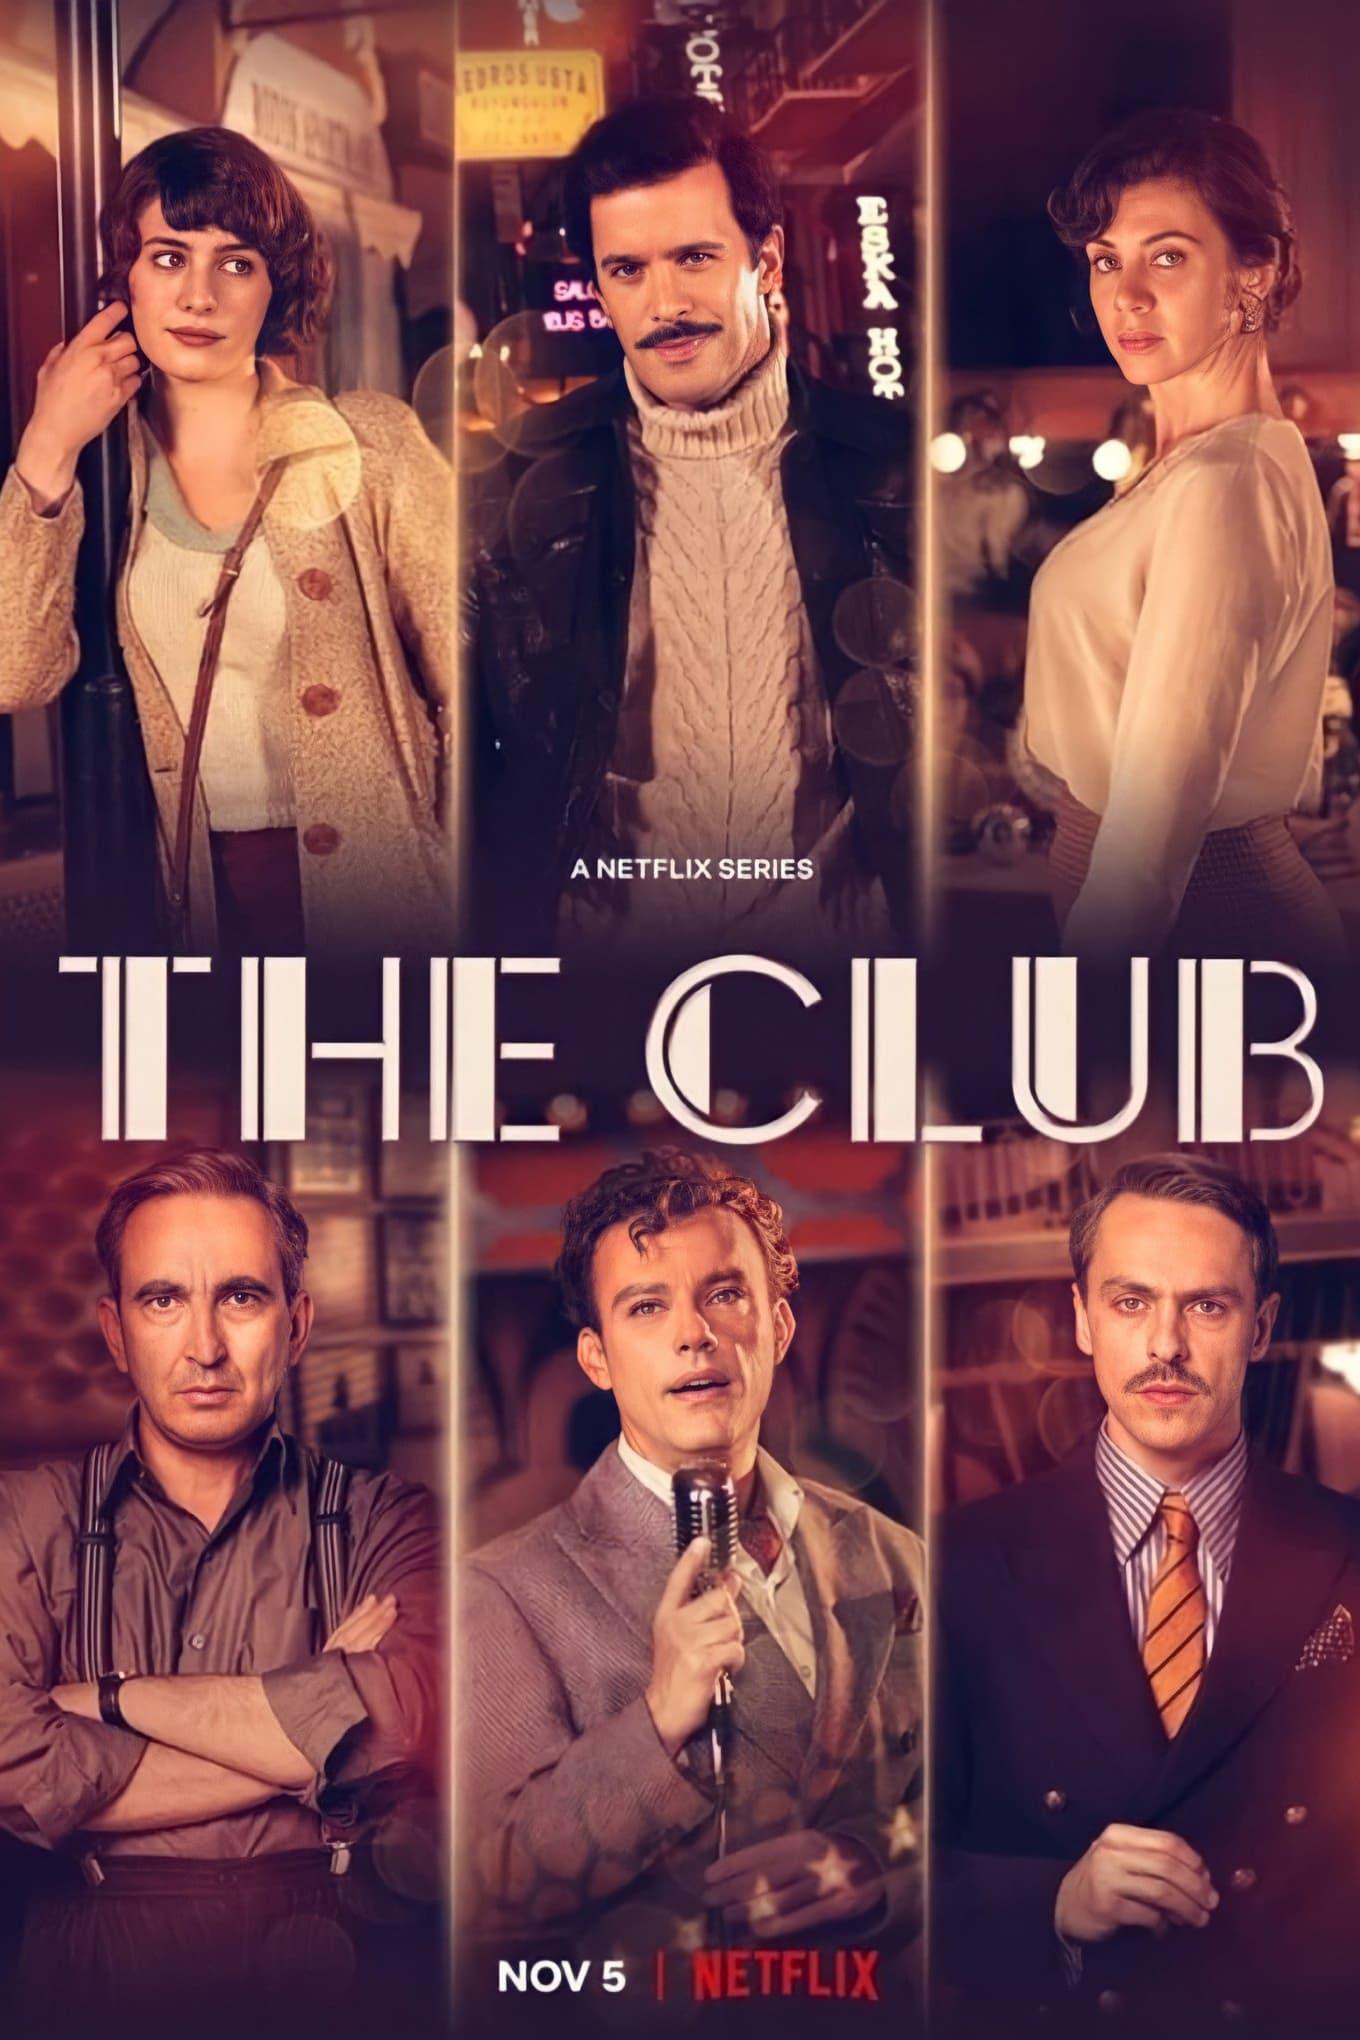 The Club poster